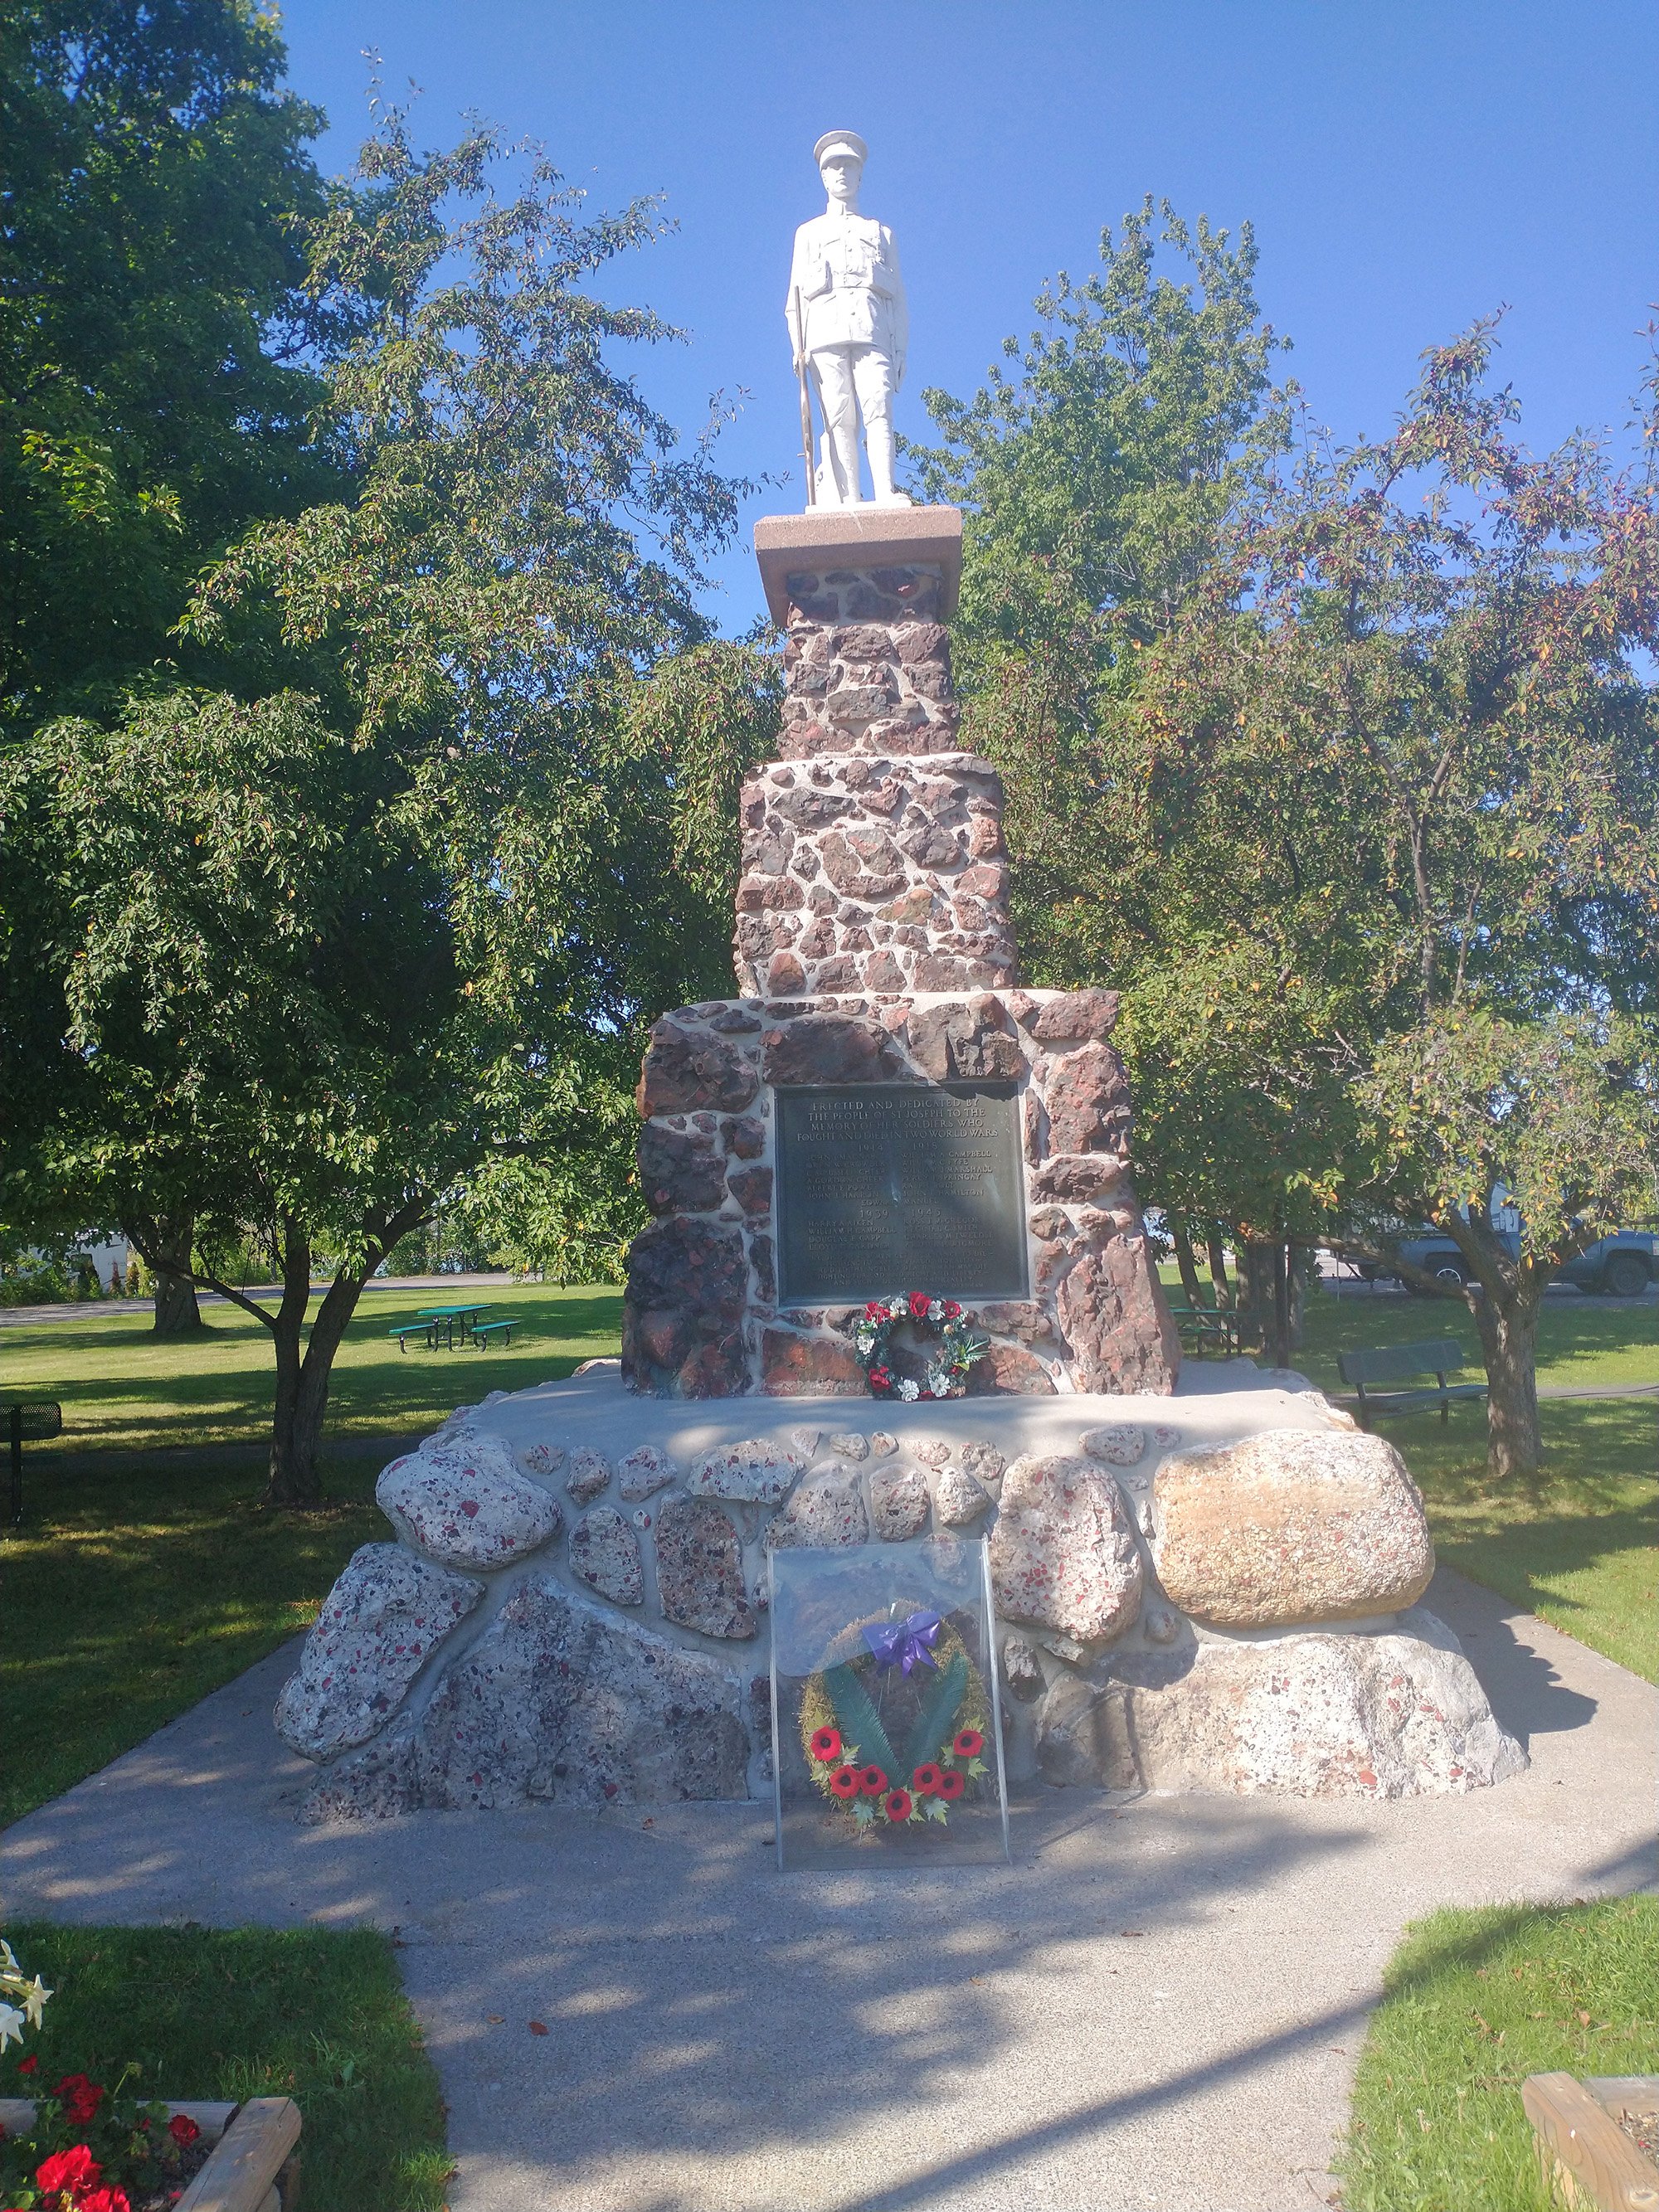 War memorial. They are all over Canada.